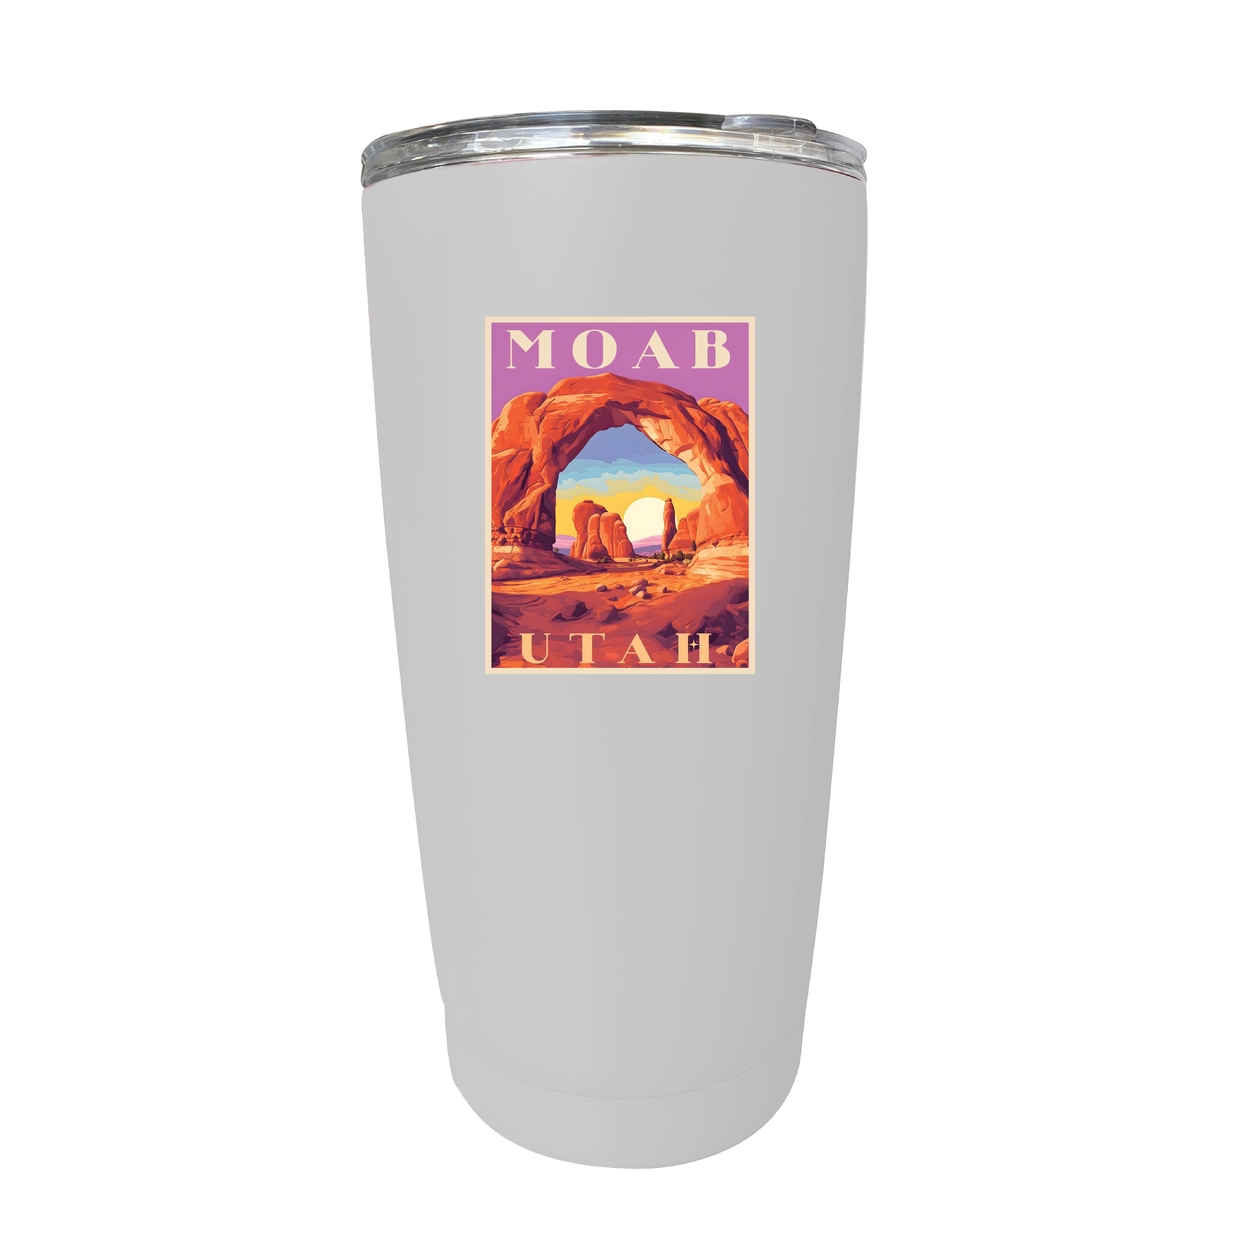 Moab Utah Souvenir 16 Oz Stainless Steel Insulated Tumbler - Yellow,,2-Pack